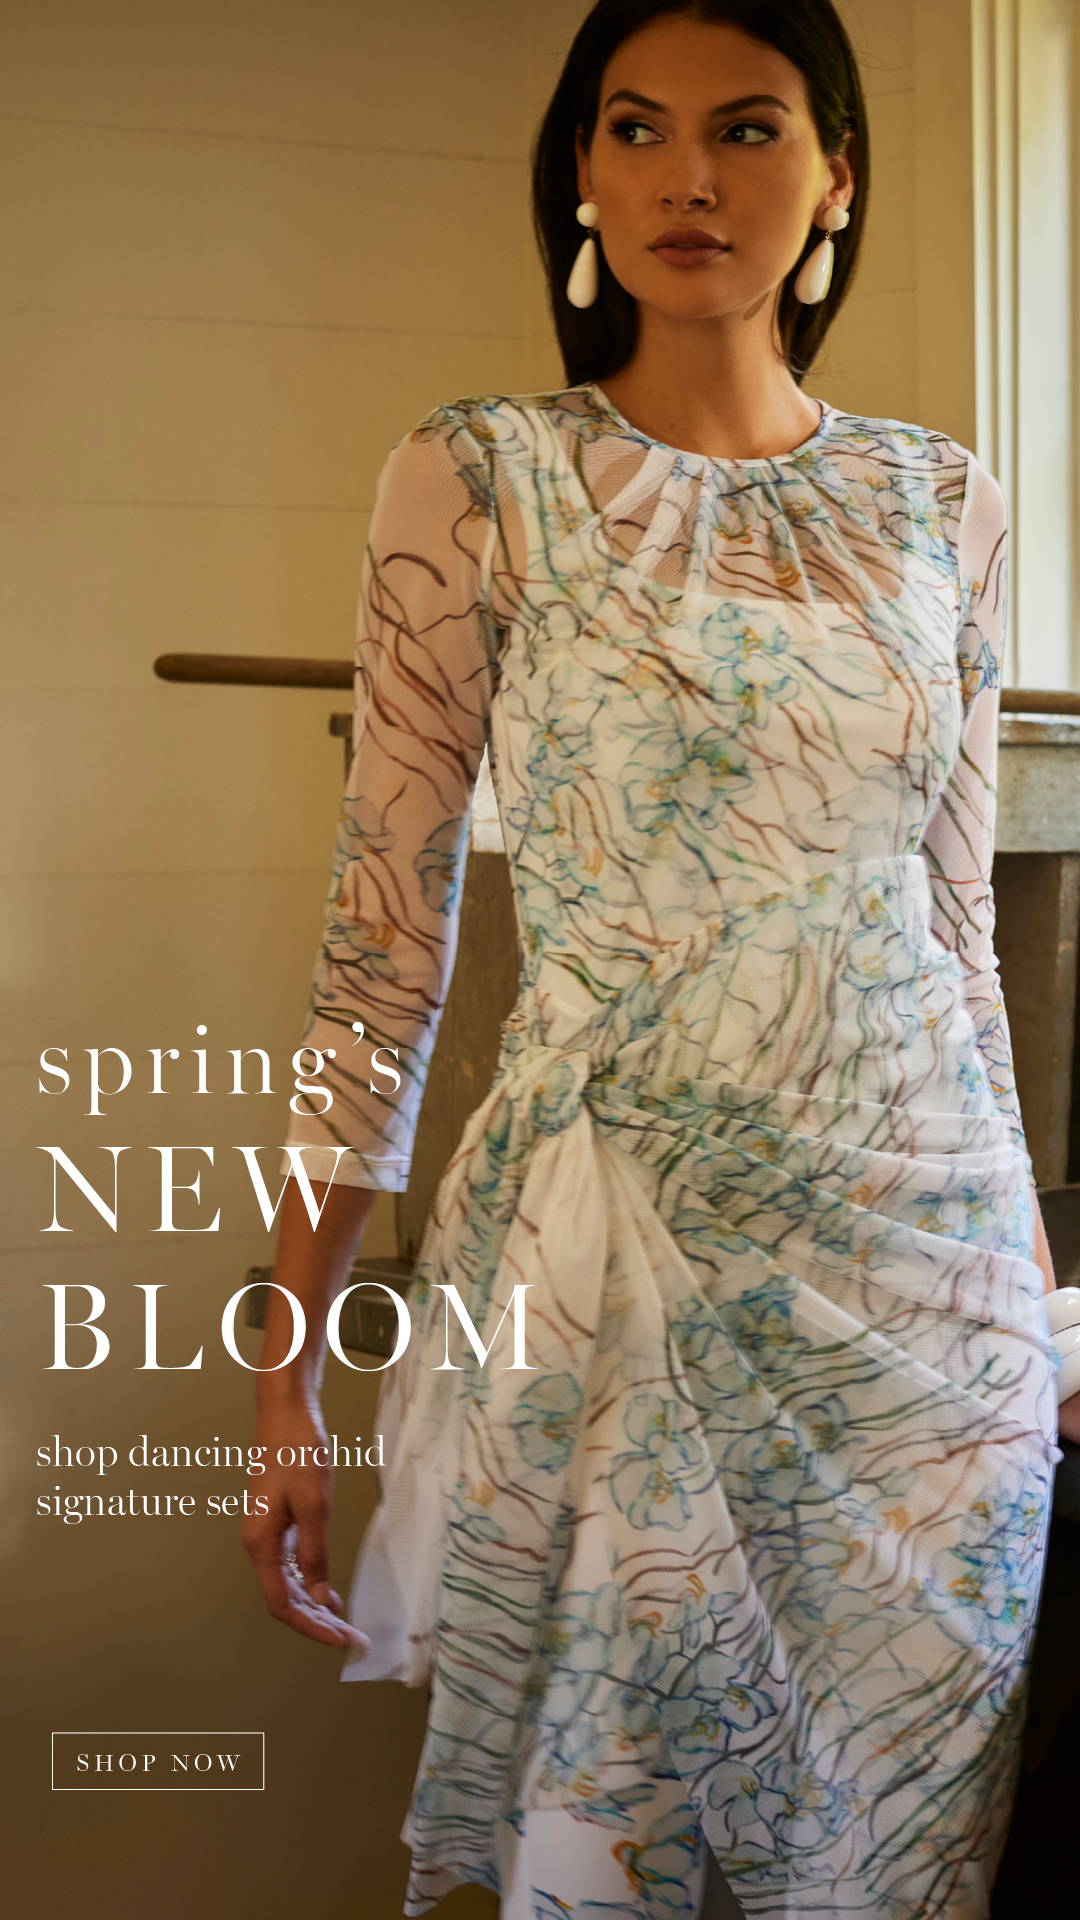 spring's new bloom | shop dancing orchid signature sets | woman wearing mesh gloral topper over. astretch knit tank top and pants by Ala von Auersperg